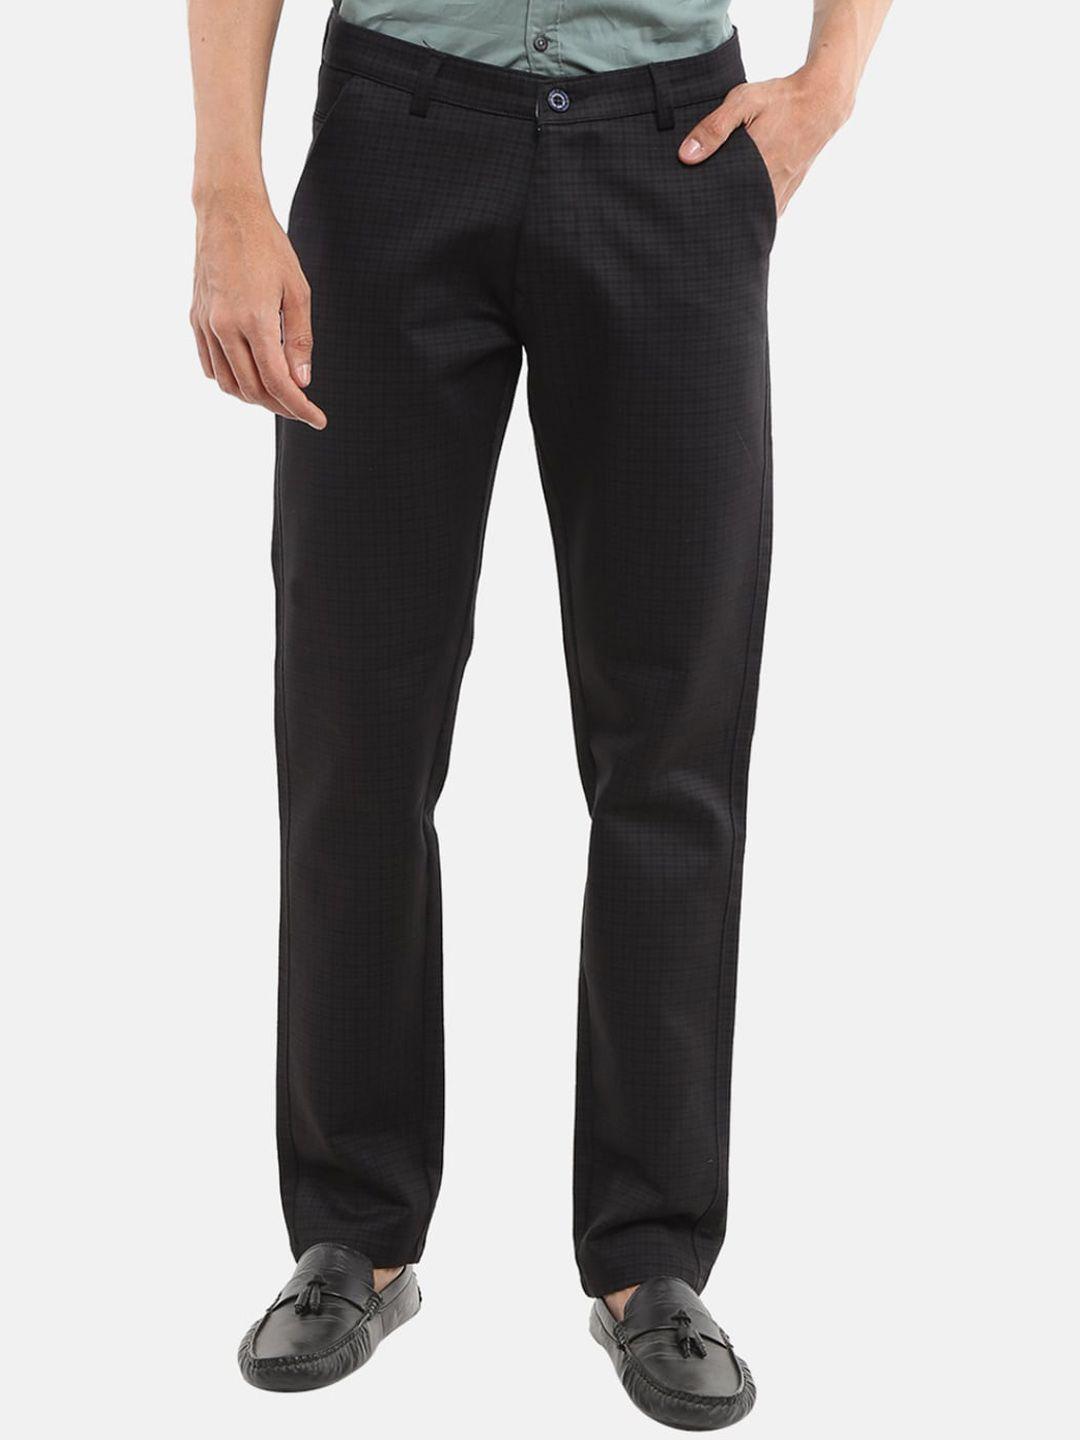 v-mart men black checked slim fit easy wash chinos trousers